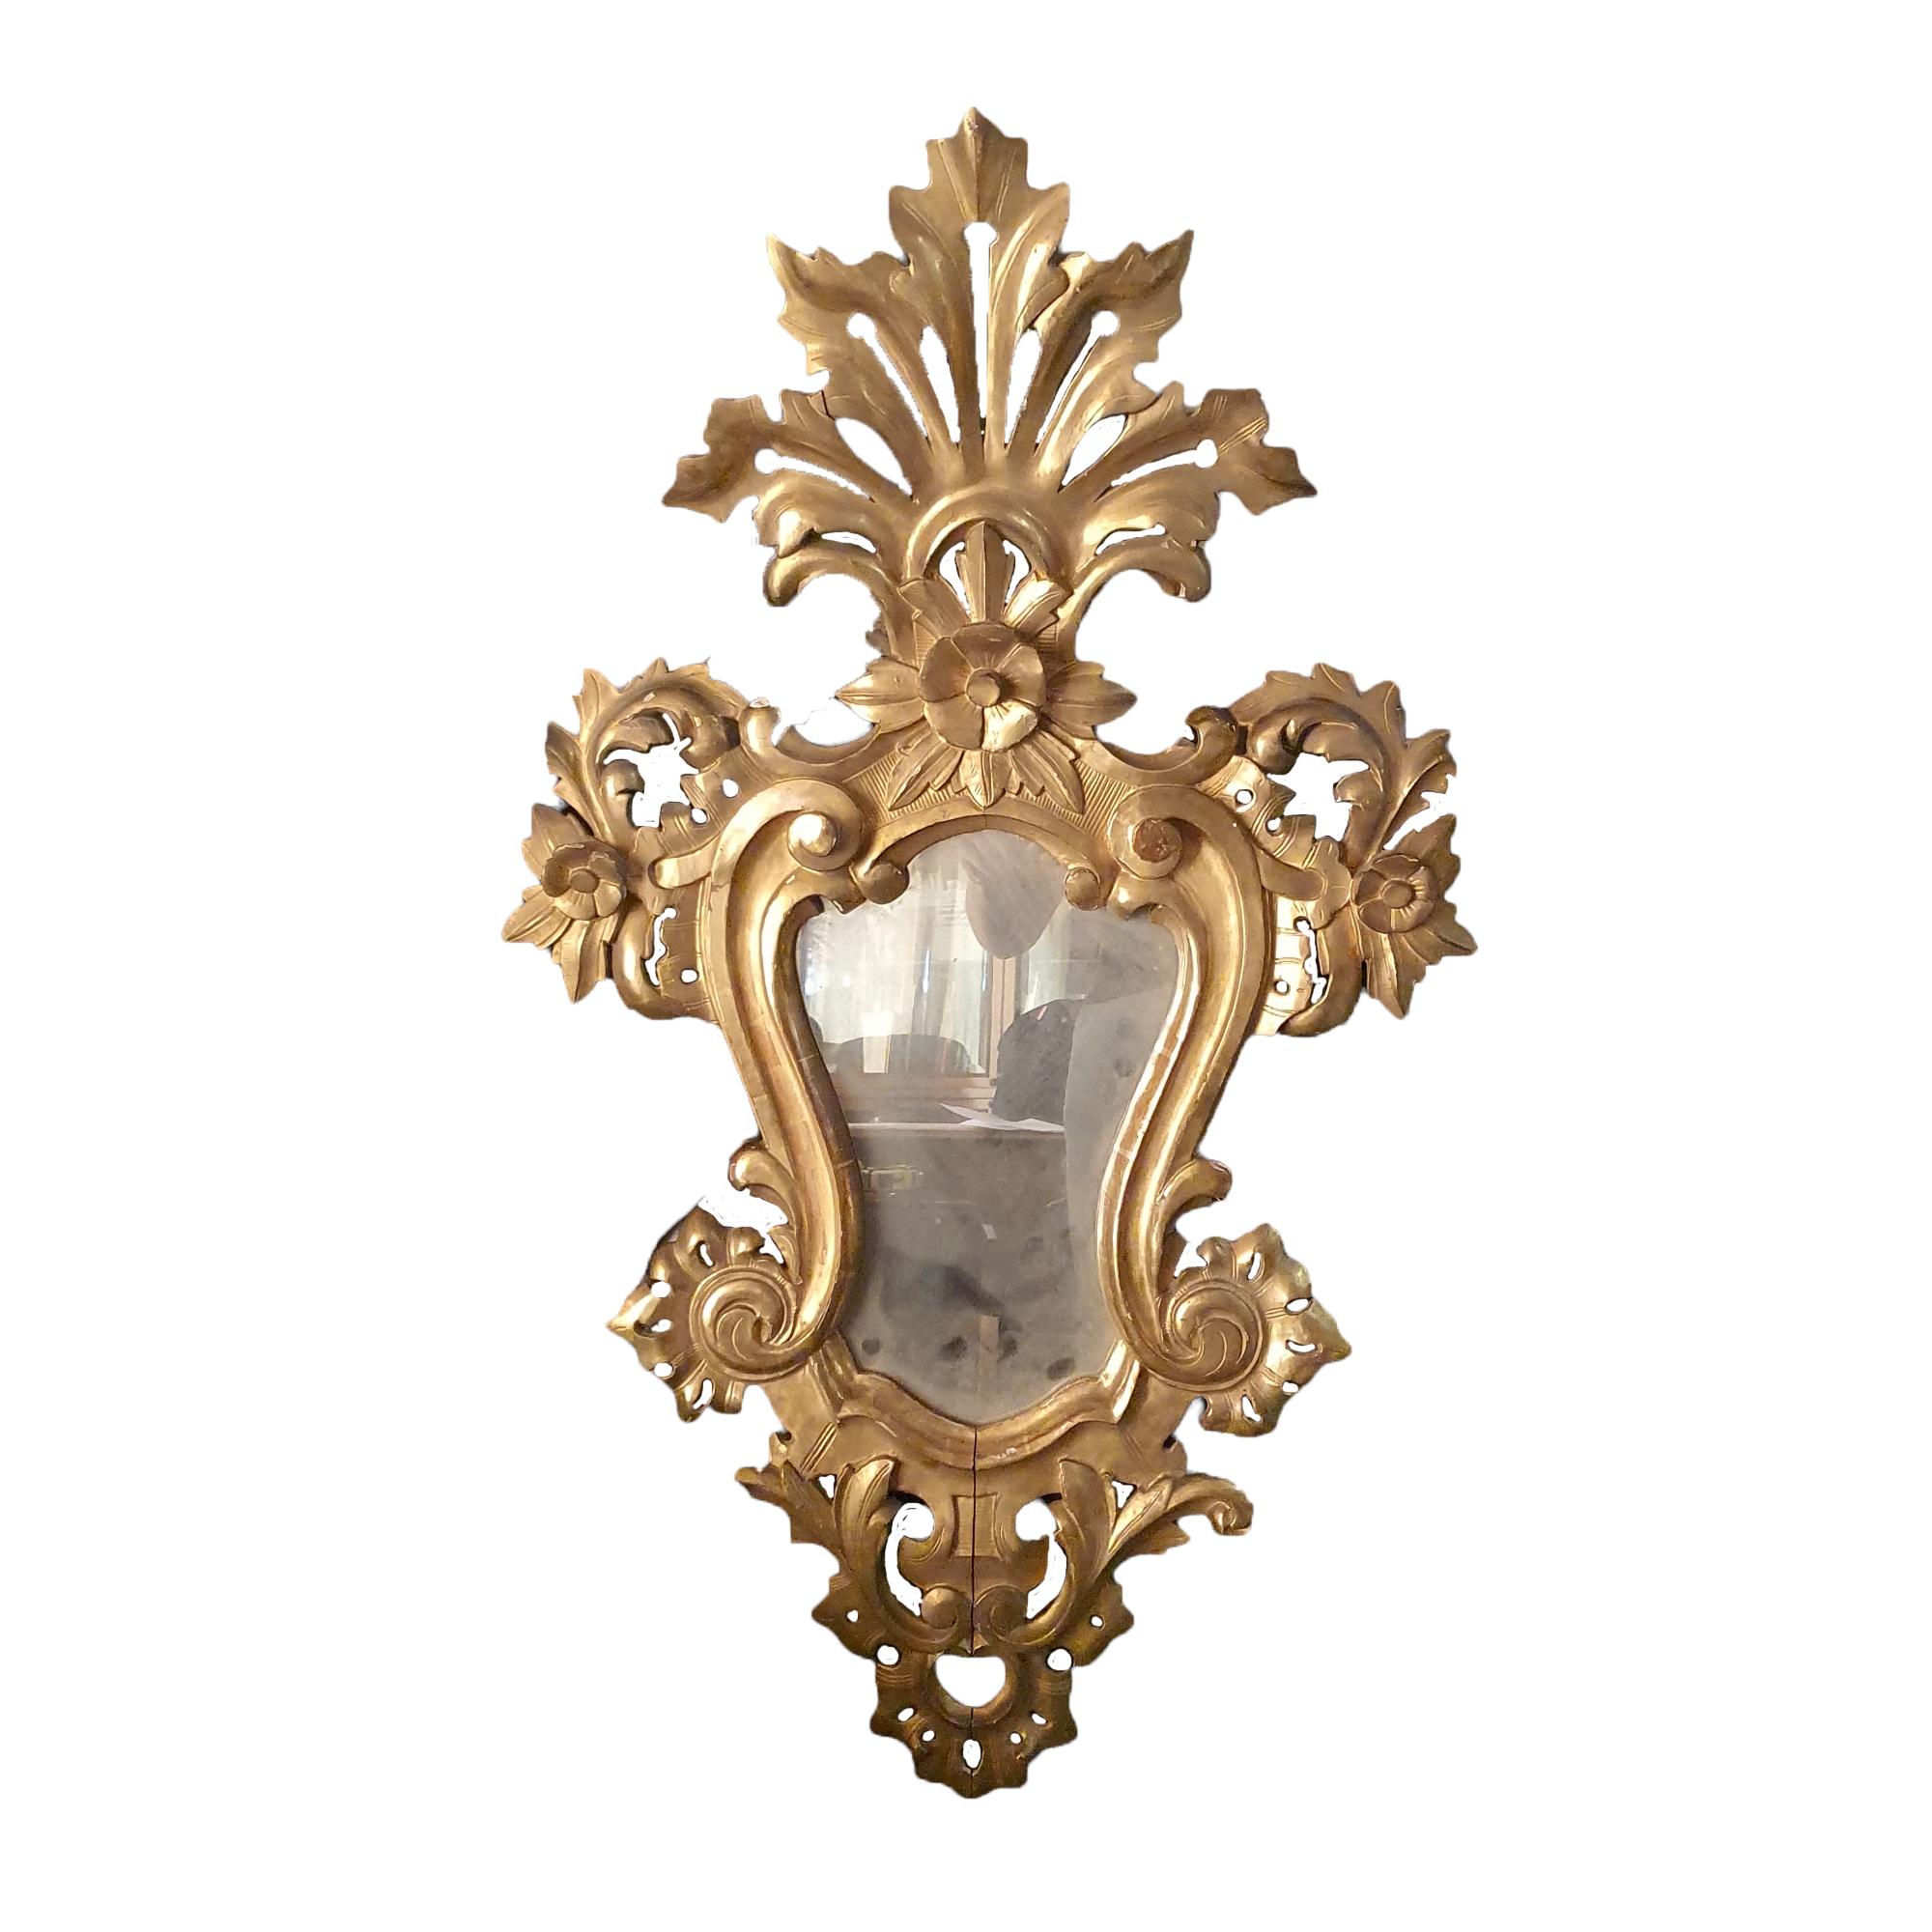 Elegant Pair of Mirrors in Carved and Gilded Wood, Pure Gold Leaf. Louis XV style, made in Italy in the 19th century.